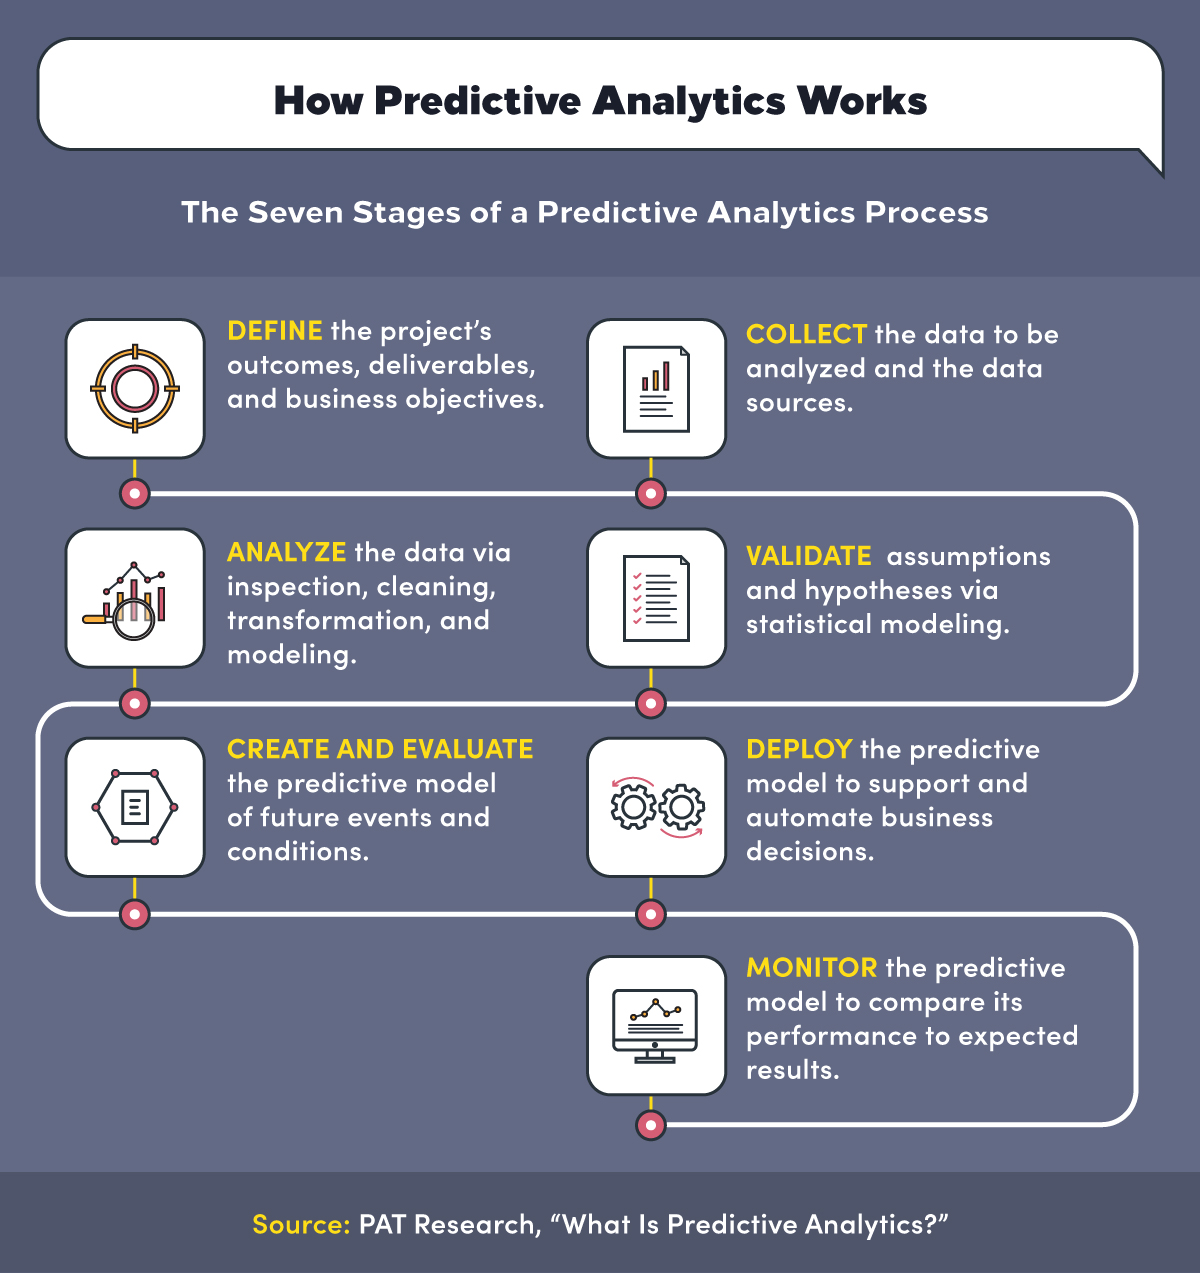 The stages of predictive analytics include Define, Analyze, Evaluate, Collect, Validate, Deploy, and Monitor